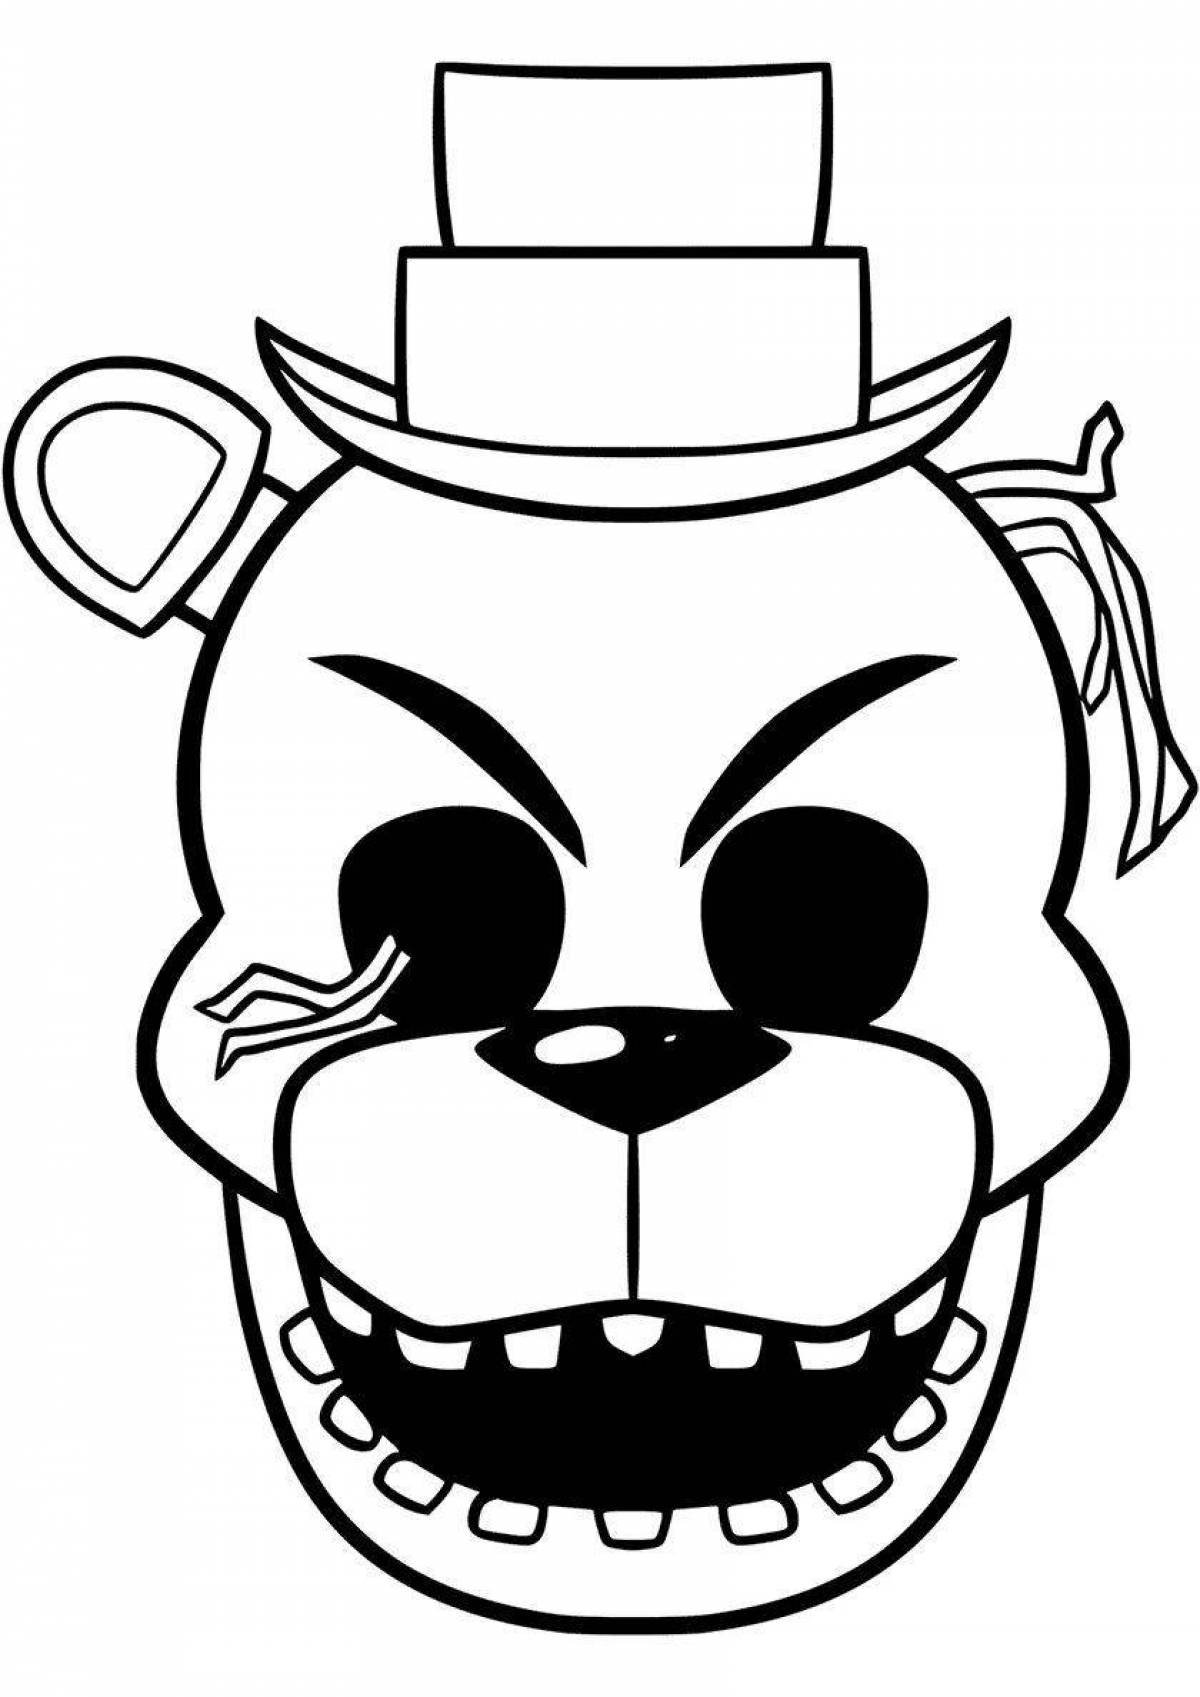 Coloring page funny bonnie mask